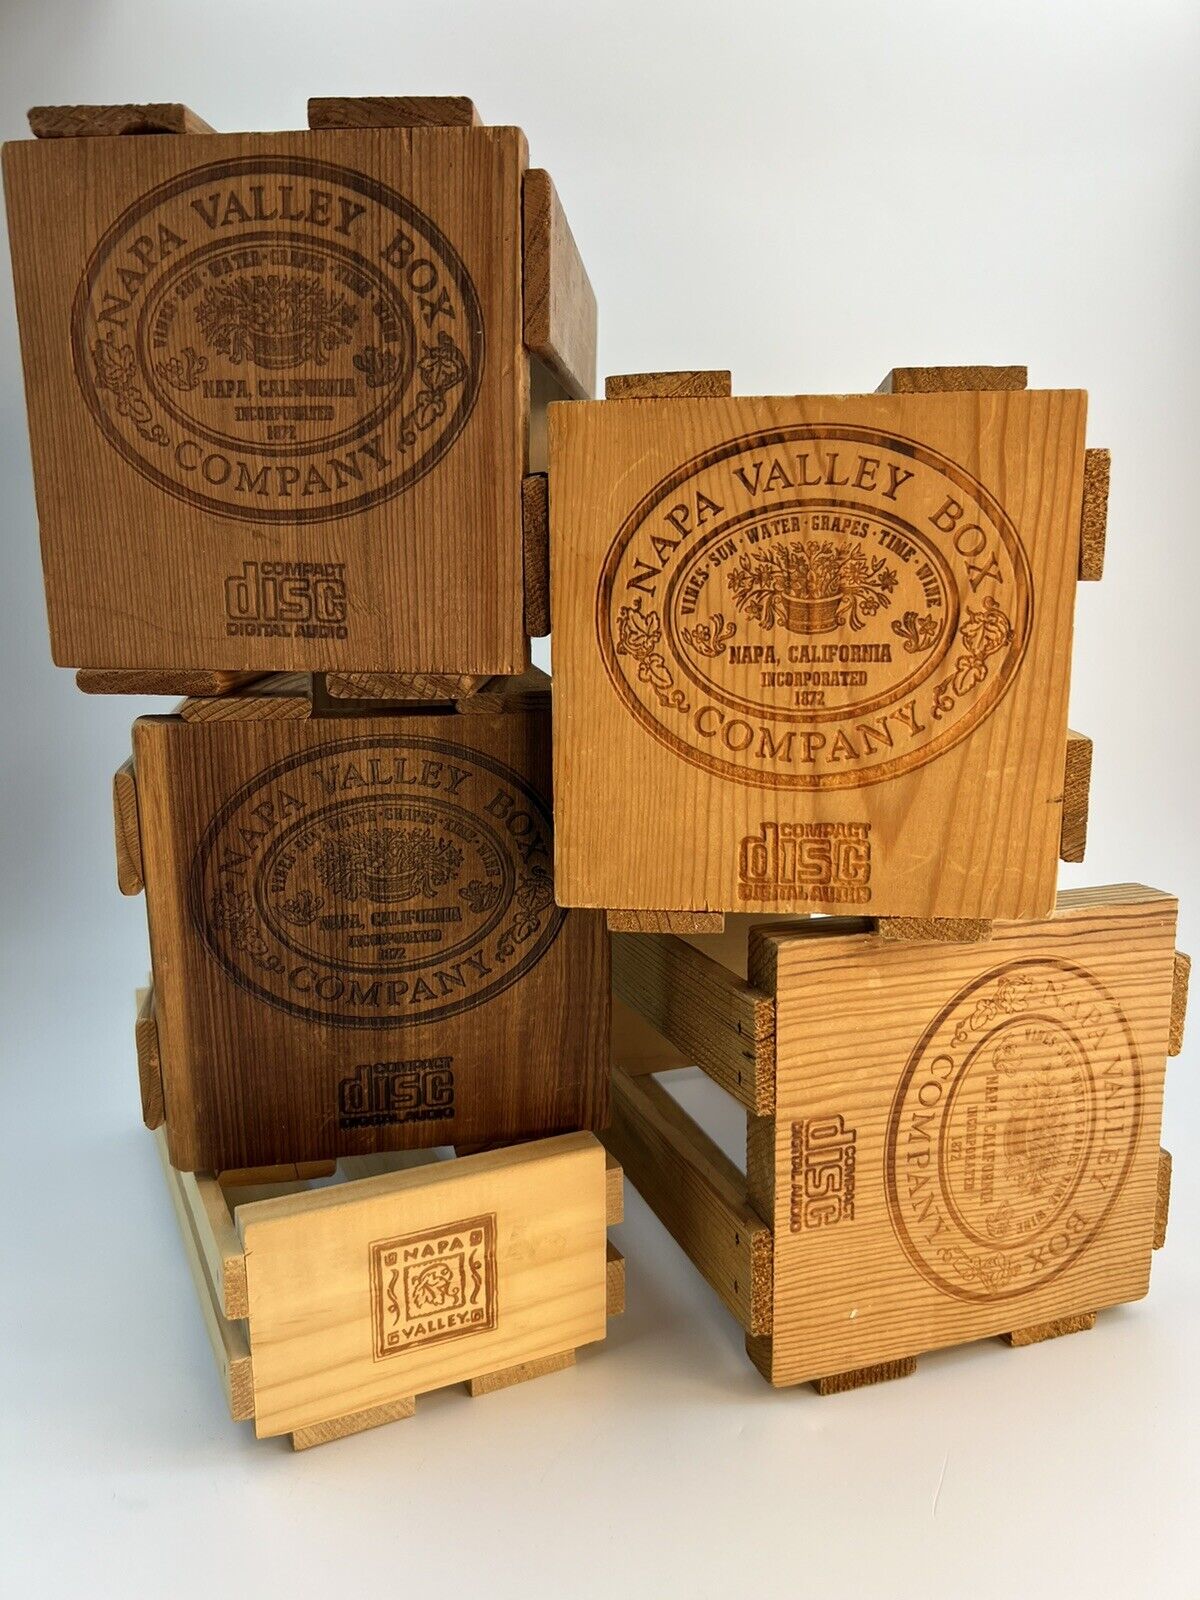 x5 VTG Napa Valley Box Company Wooden CD Crate Cassette Wood Storage Containers